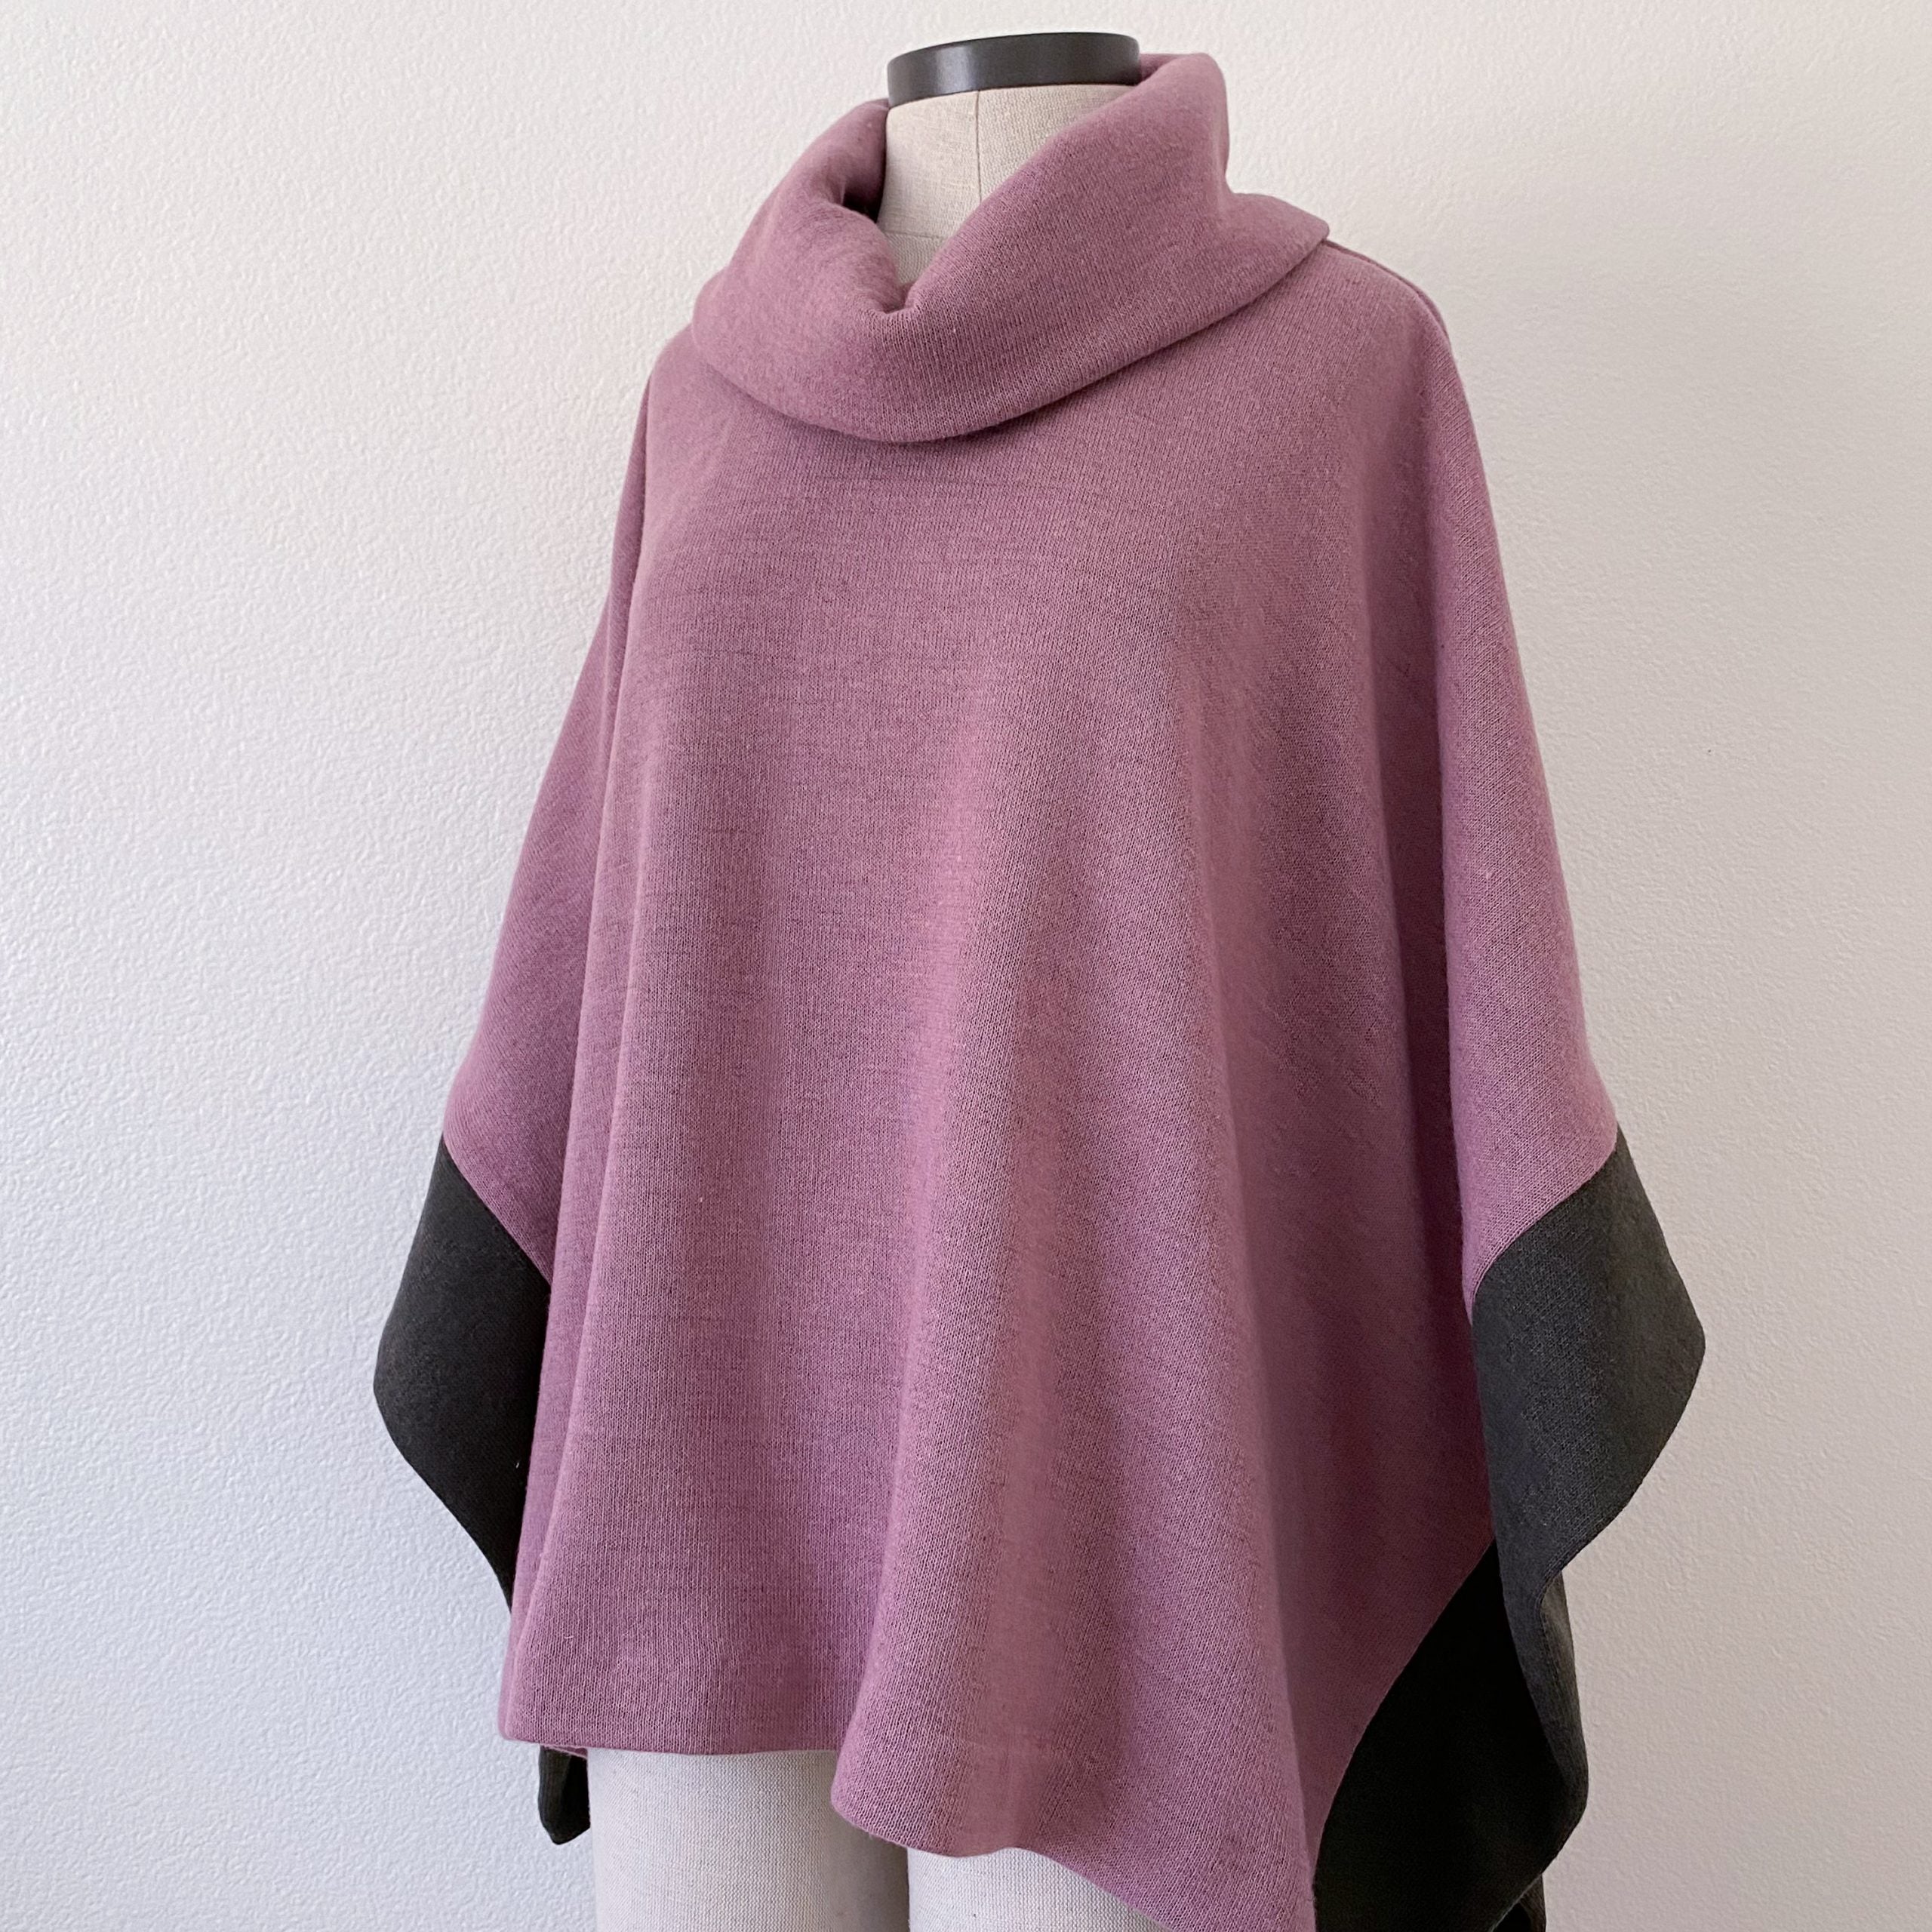 Mannequin wearing the Wintertide Poncho sewing pattern from Blue Dot Patterns on The Fold Line. A poncho pattern made in medium to heavy weight knits including ponte, sweater knit, sweatshirt fleece and French terry fabrics, featuring a cowl neck with ope